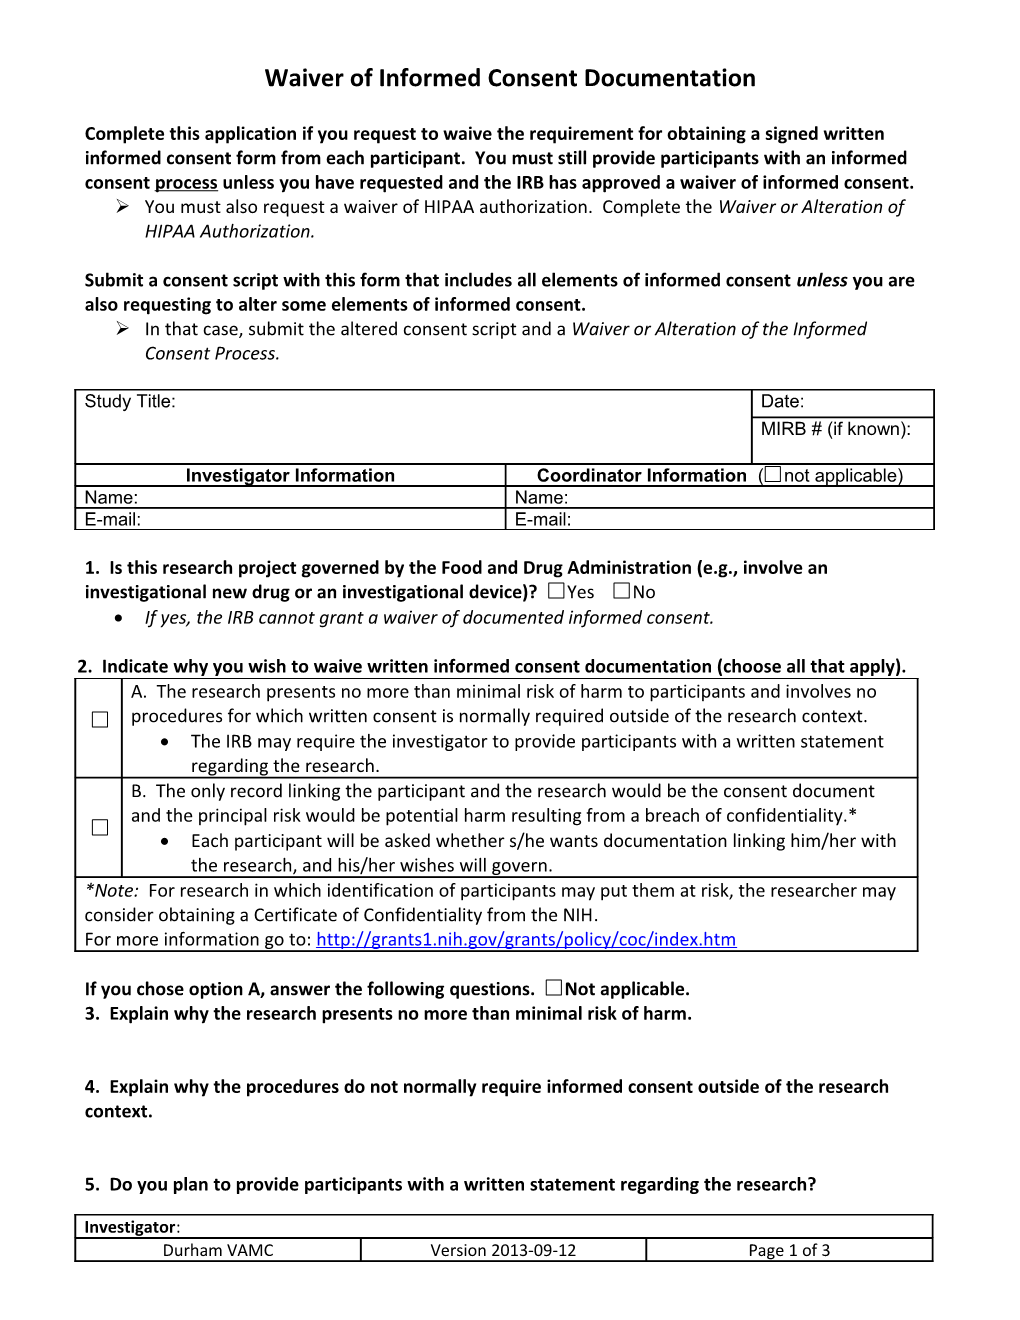 Waiver of Informed Consent Documentation